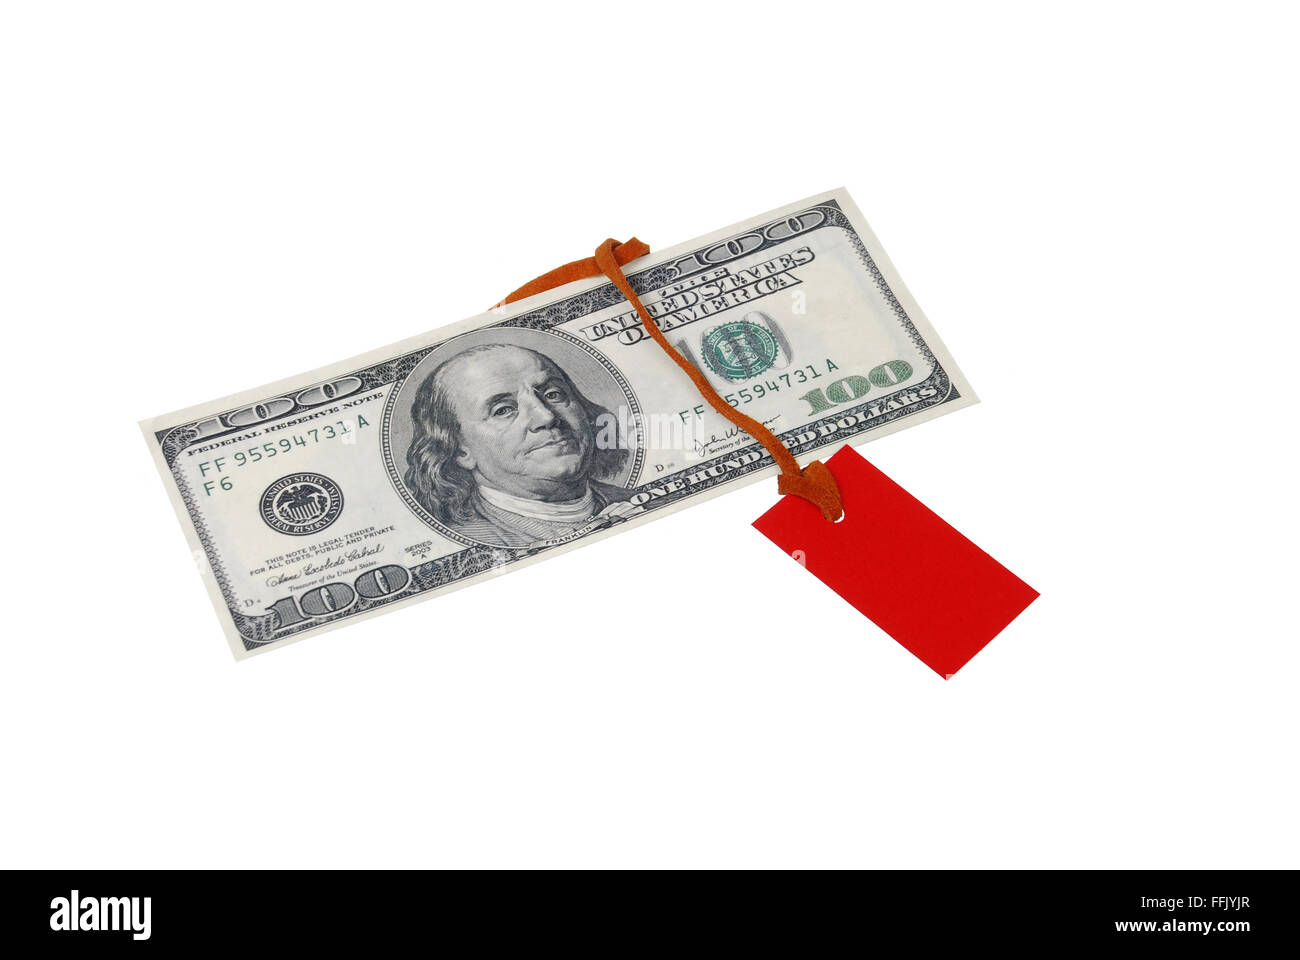 $ 100 bill with a red tag on brown leather rope on a white background Stock Photo